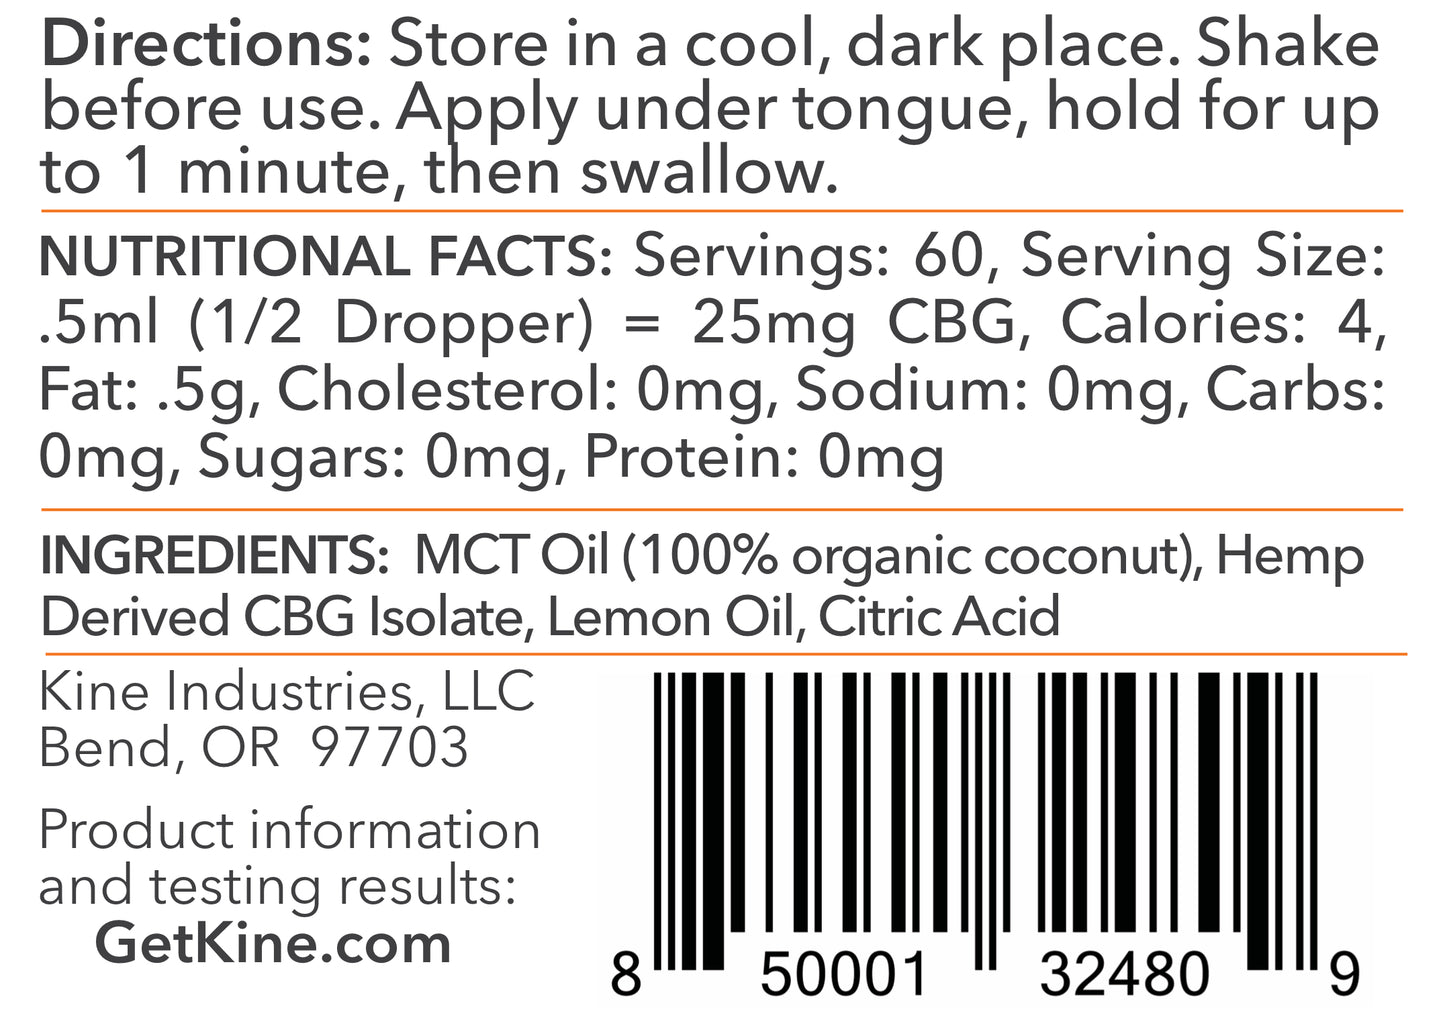 Kine Lemon flavored organic CBG 1500mg tincture drops Ingredients List and Nutritional Facts